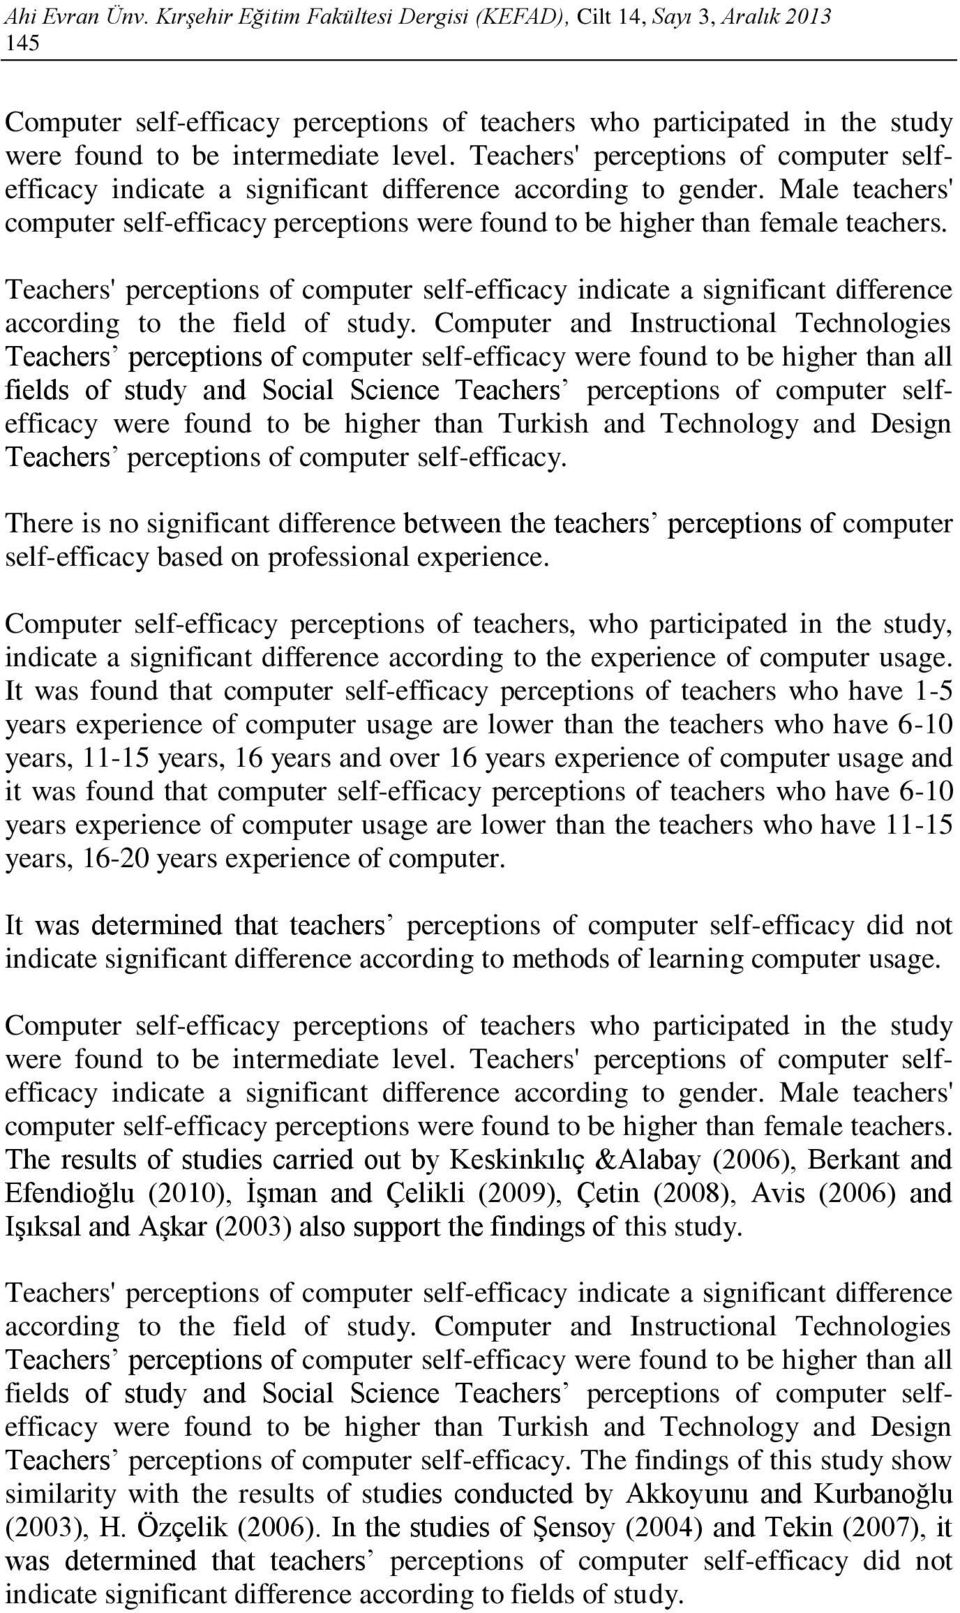 Teachers' perceptions of computer selfefficacy indicate a significant difference according to gender. Male teachers' computer self-efficacy perceptions were found to be higher than female teachers.